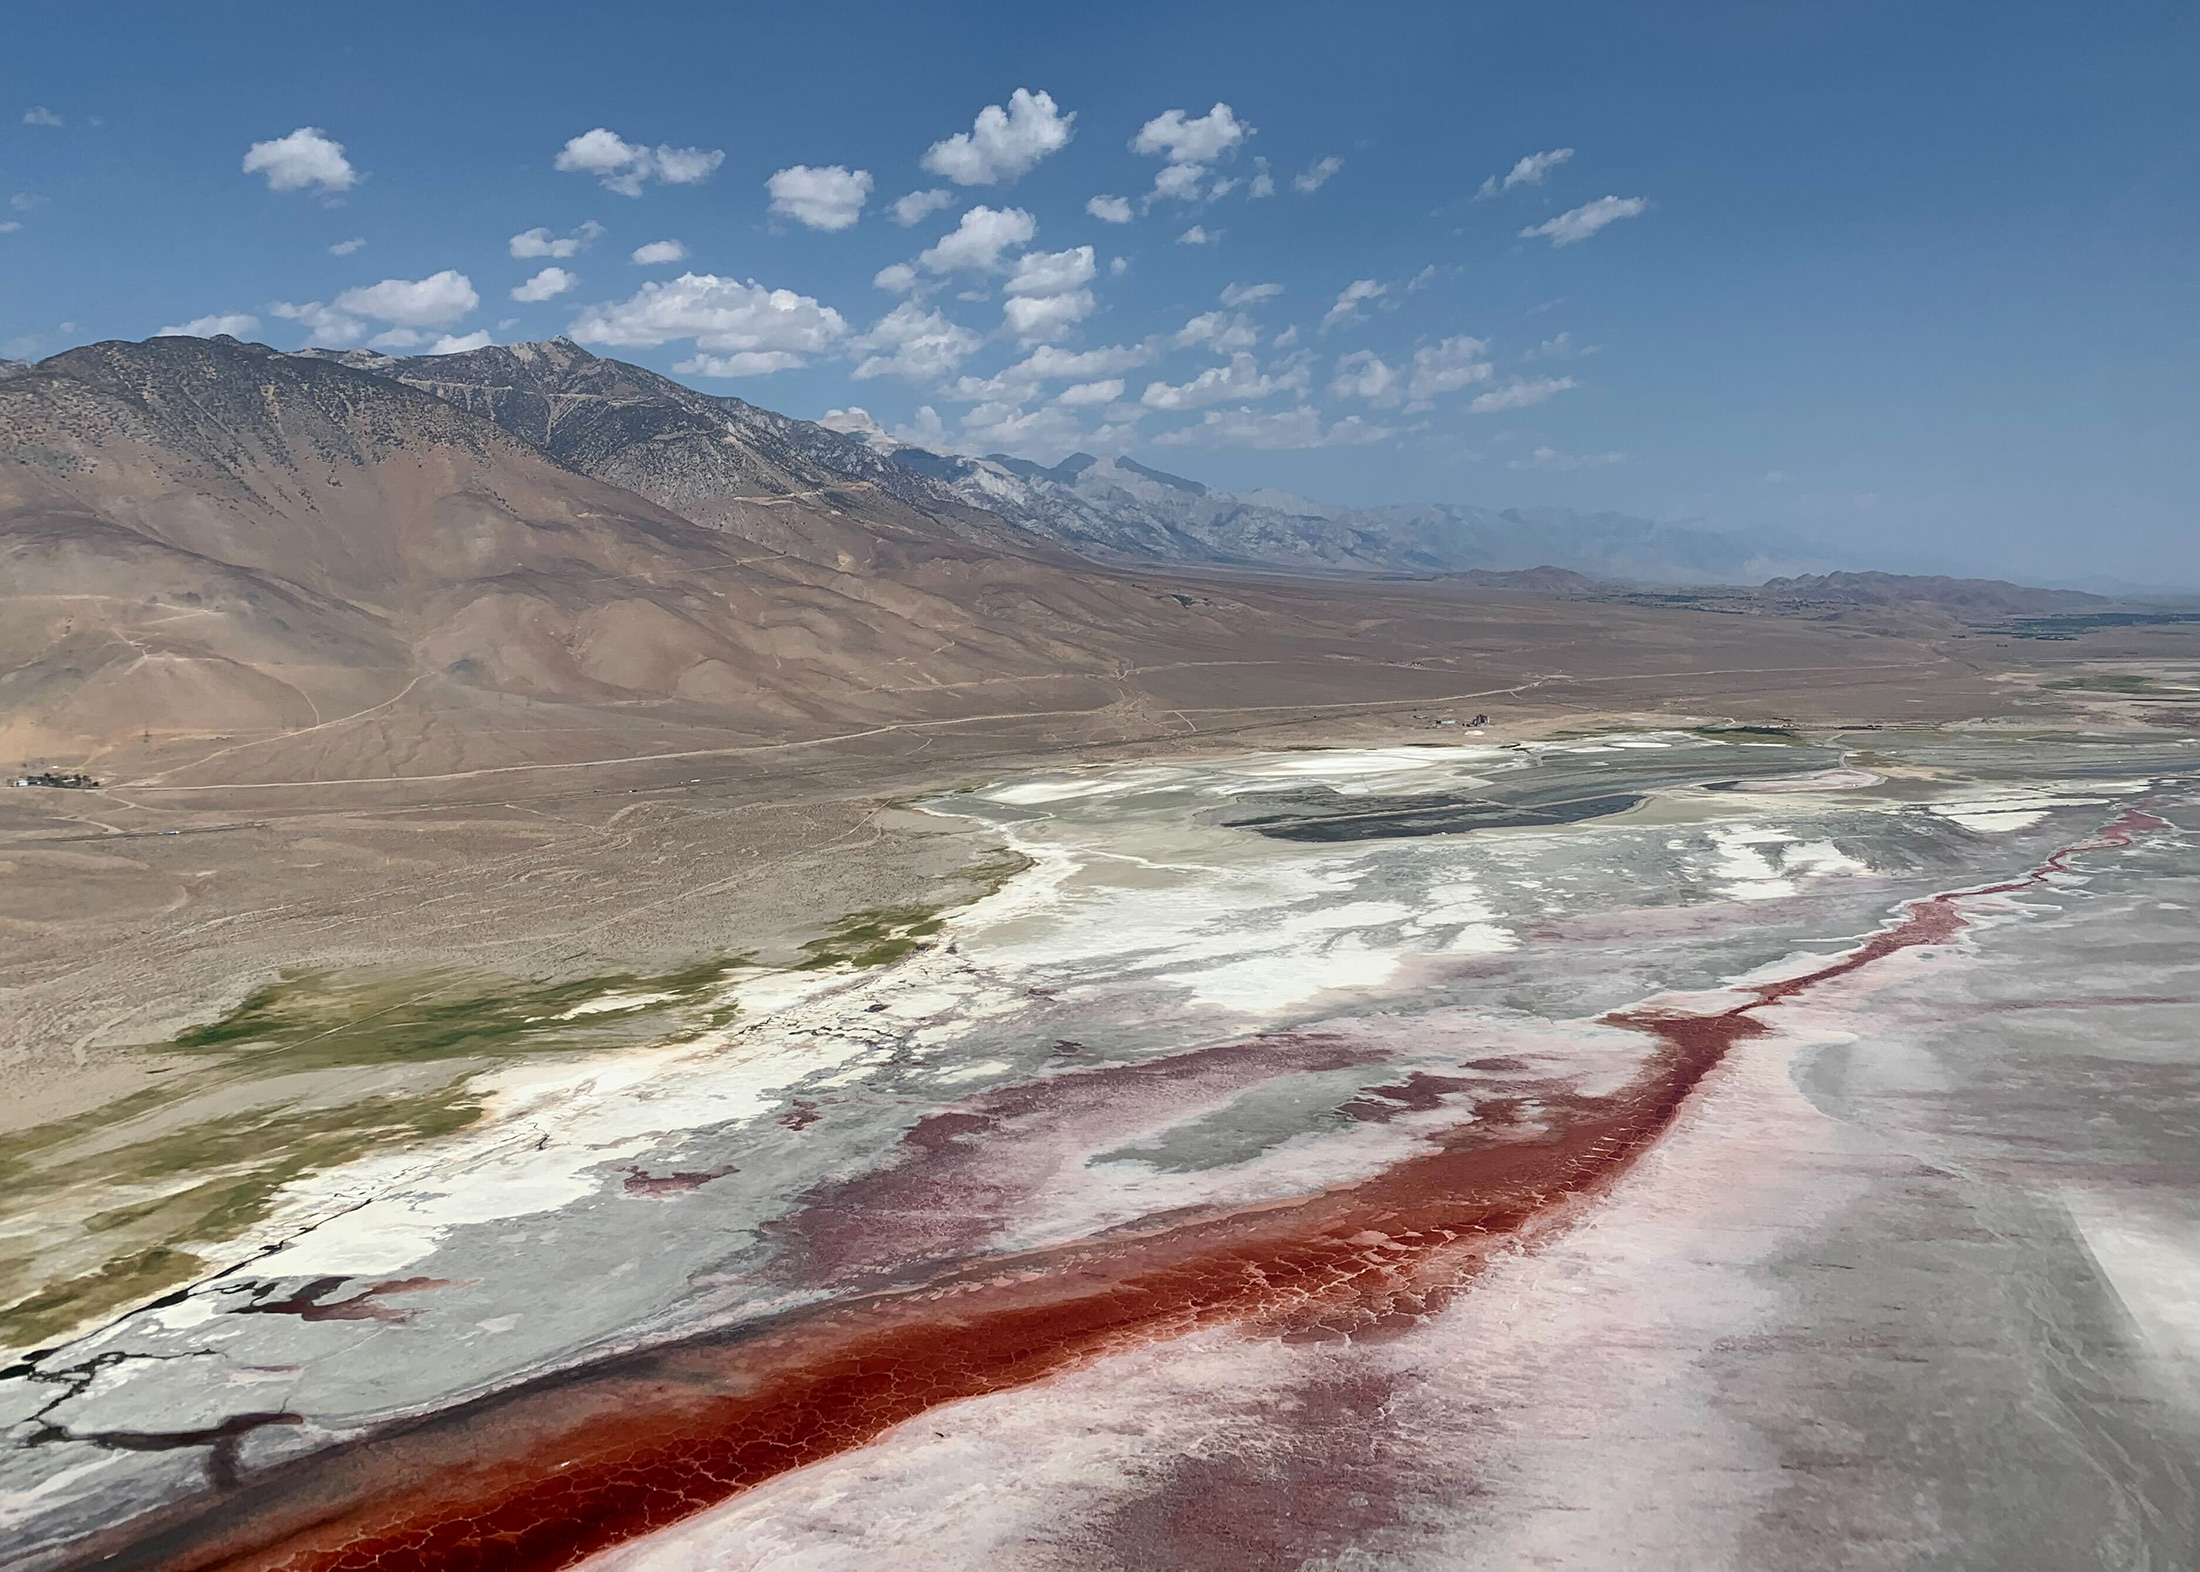 In Owens Valley, about 250 miles north of L.A. and east of the Sierra Nevada, a blood-red gash—actually red algae—stains the brine pool of Owens Lake.